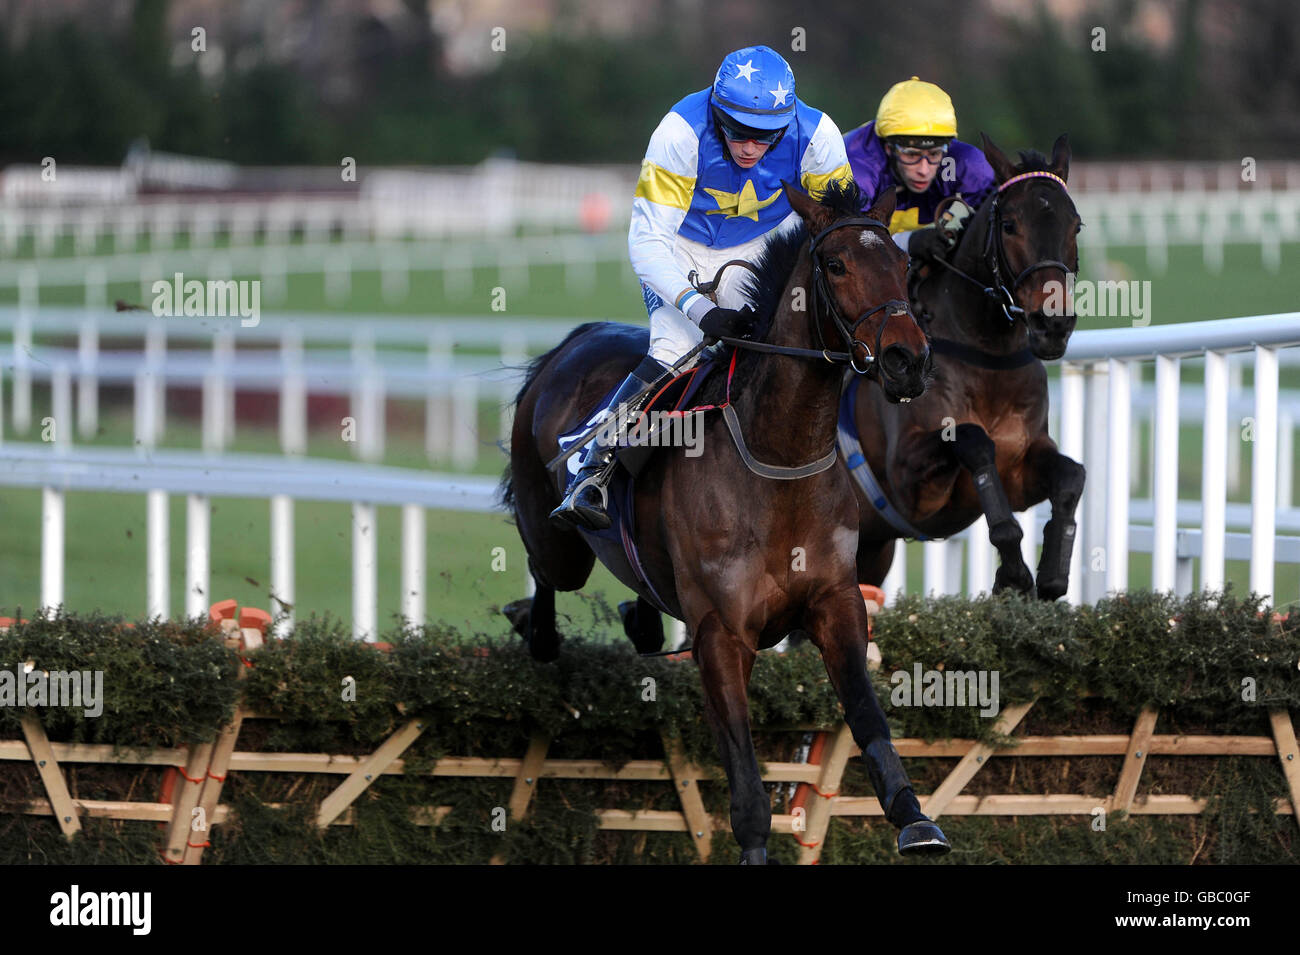 Voler La Vedette, with jockey Matt O'Connor, clears the last on their way to winning the Durkan New Homes Maiden Hurdle during Stephens Day and Durkan Day at Leopardstown Racecourse, Ireland. Stock Photo